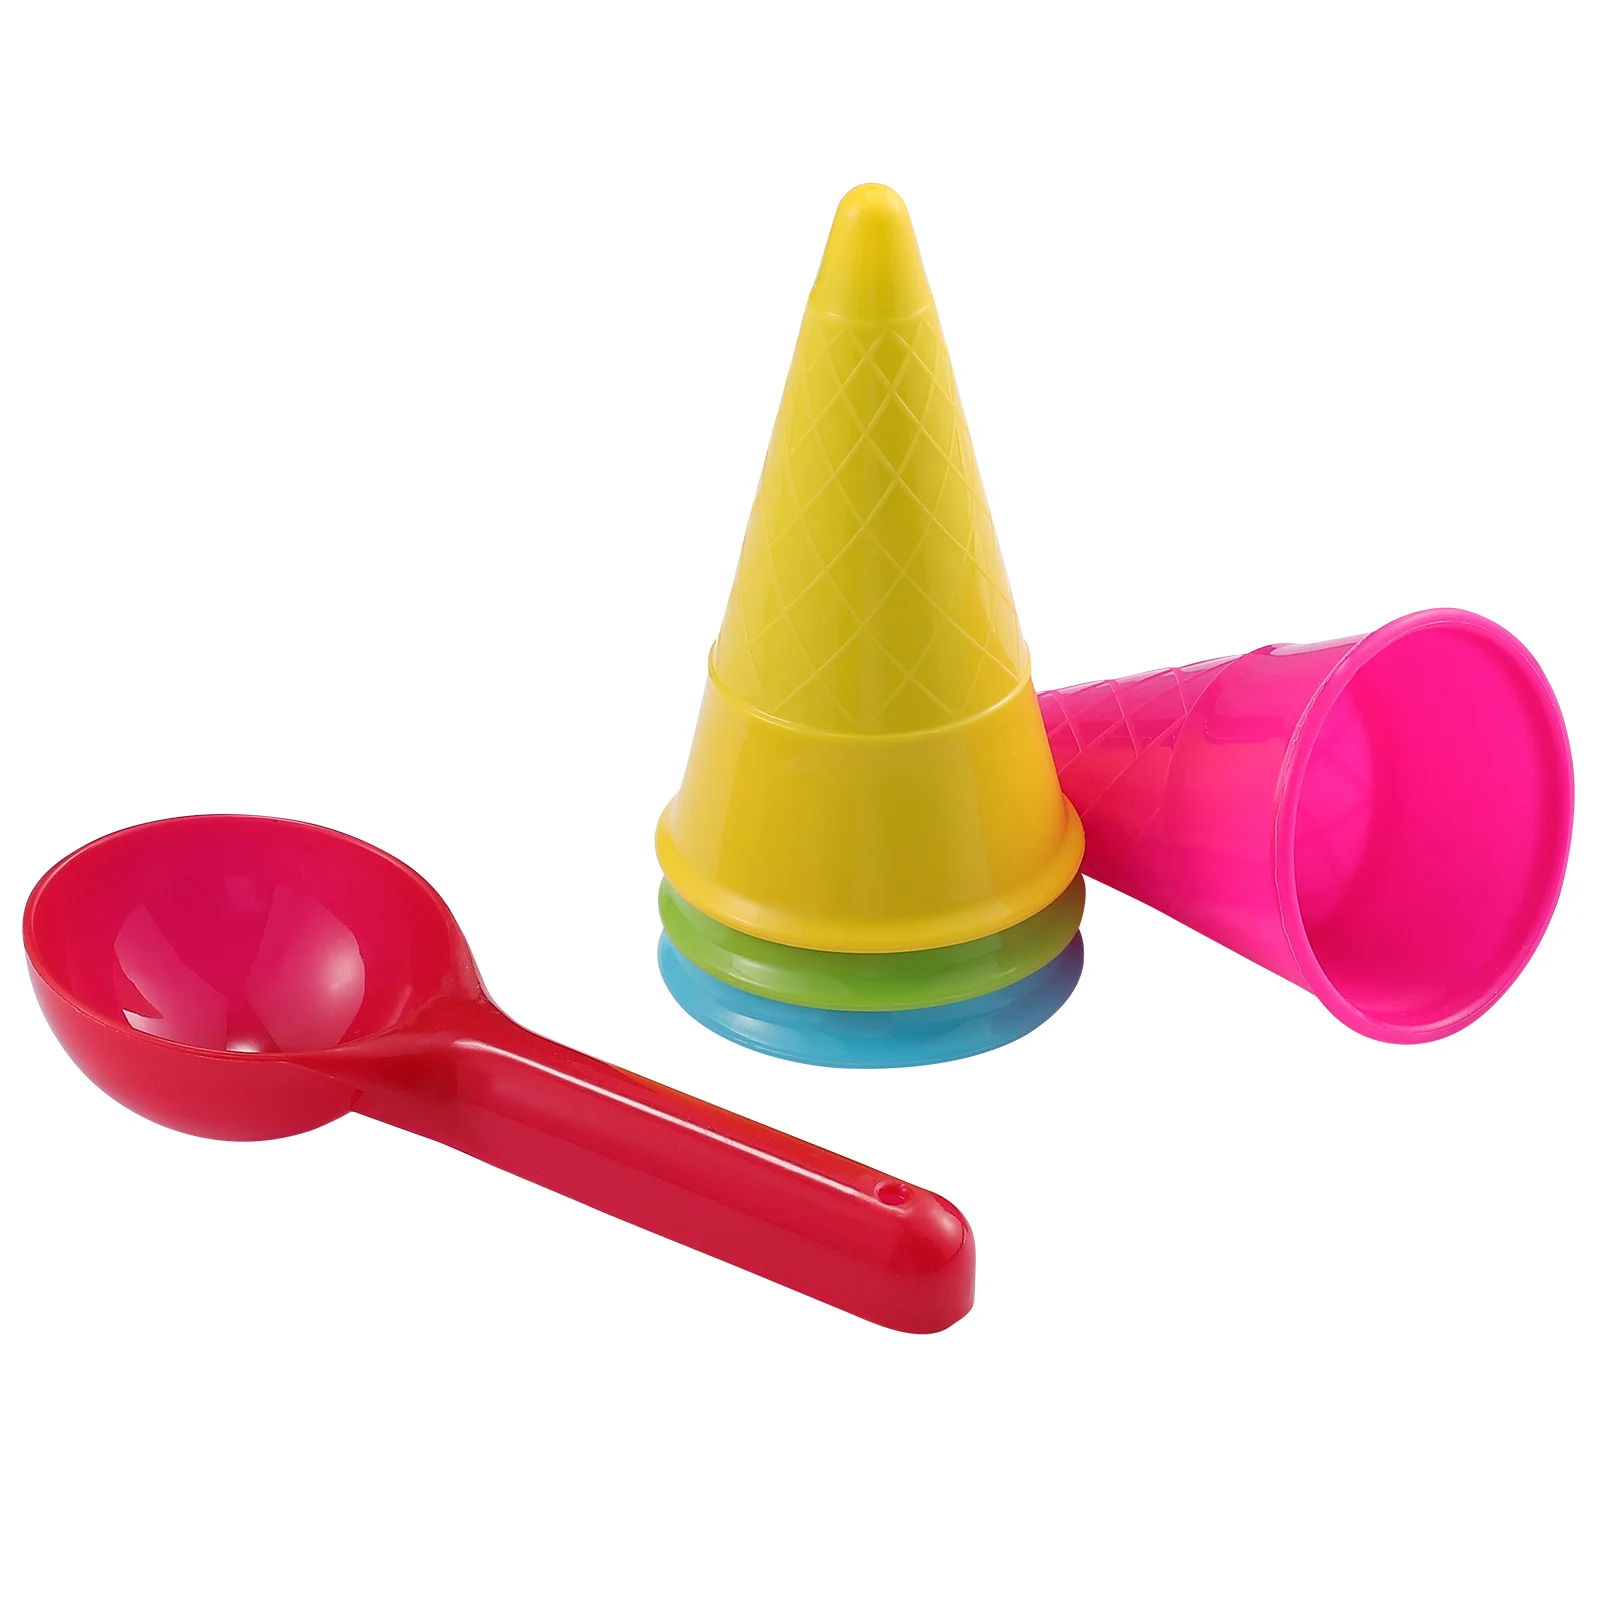 

TOYANDONA 2 Sets Outdoor Scoop Ice Cream Cones Beach Toy Set for Children Toddlers (Random Color) Sand play toys